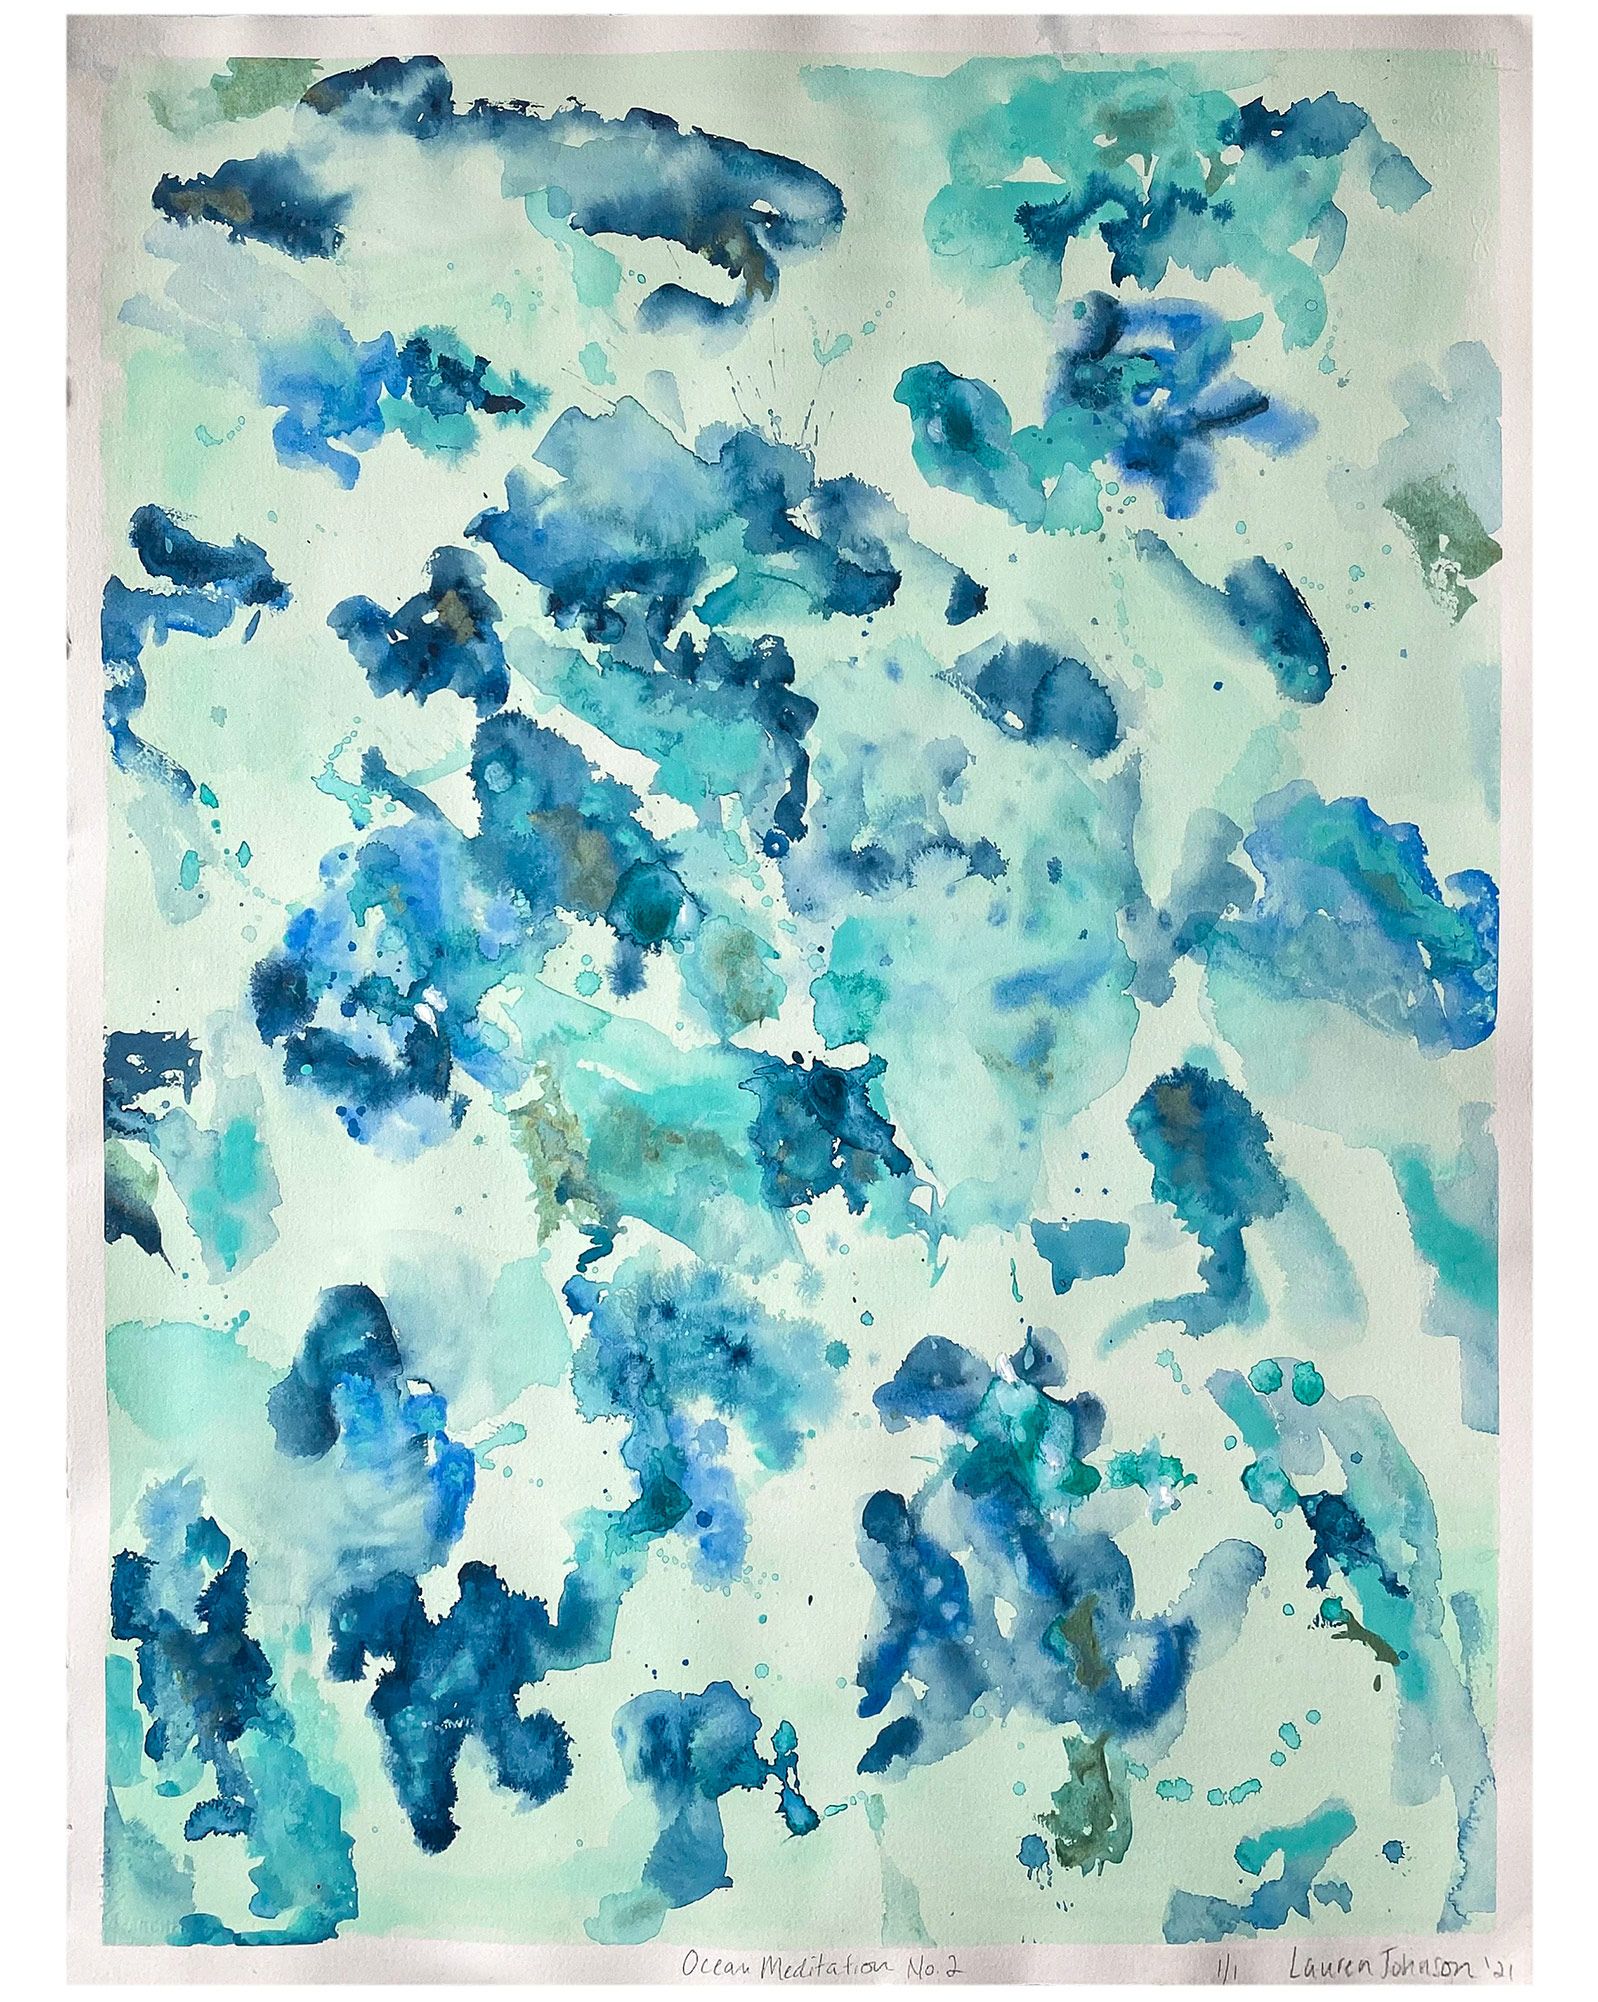 "Ocean Meditation no. 2" by Lauren Johnson | Serena and Lily